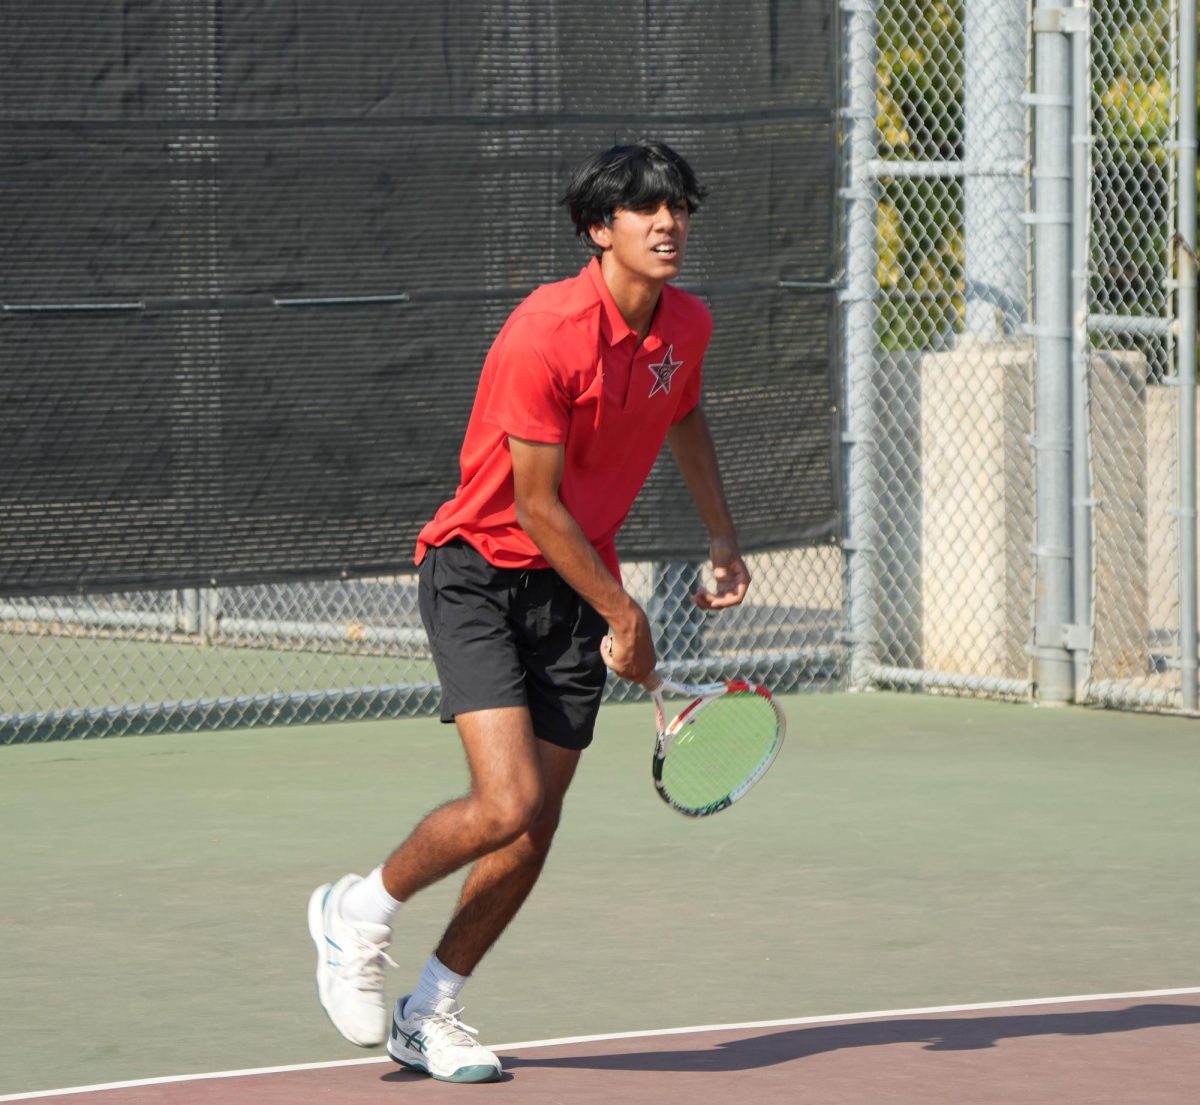 Coppell junior Shay Patel serves during afternoon tennis practice on Sep. 22. The Coppell tennis team defeated Dallas Ursuline and Jesuit, 22-5, on Sep. 29 at Coppell Tennis Center. 